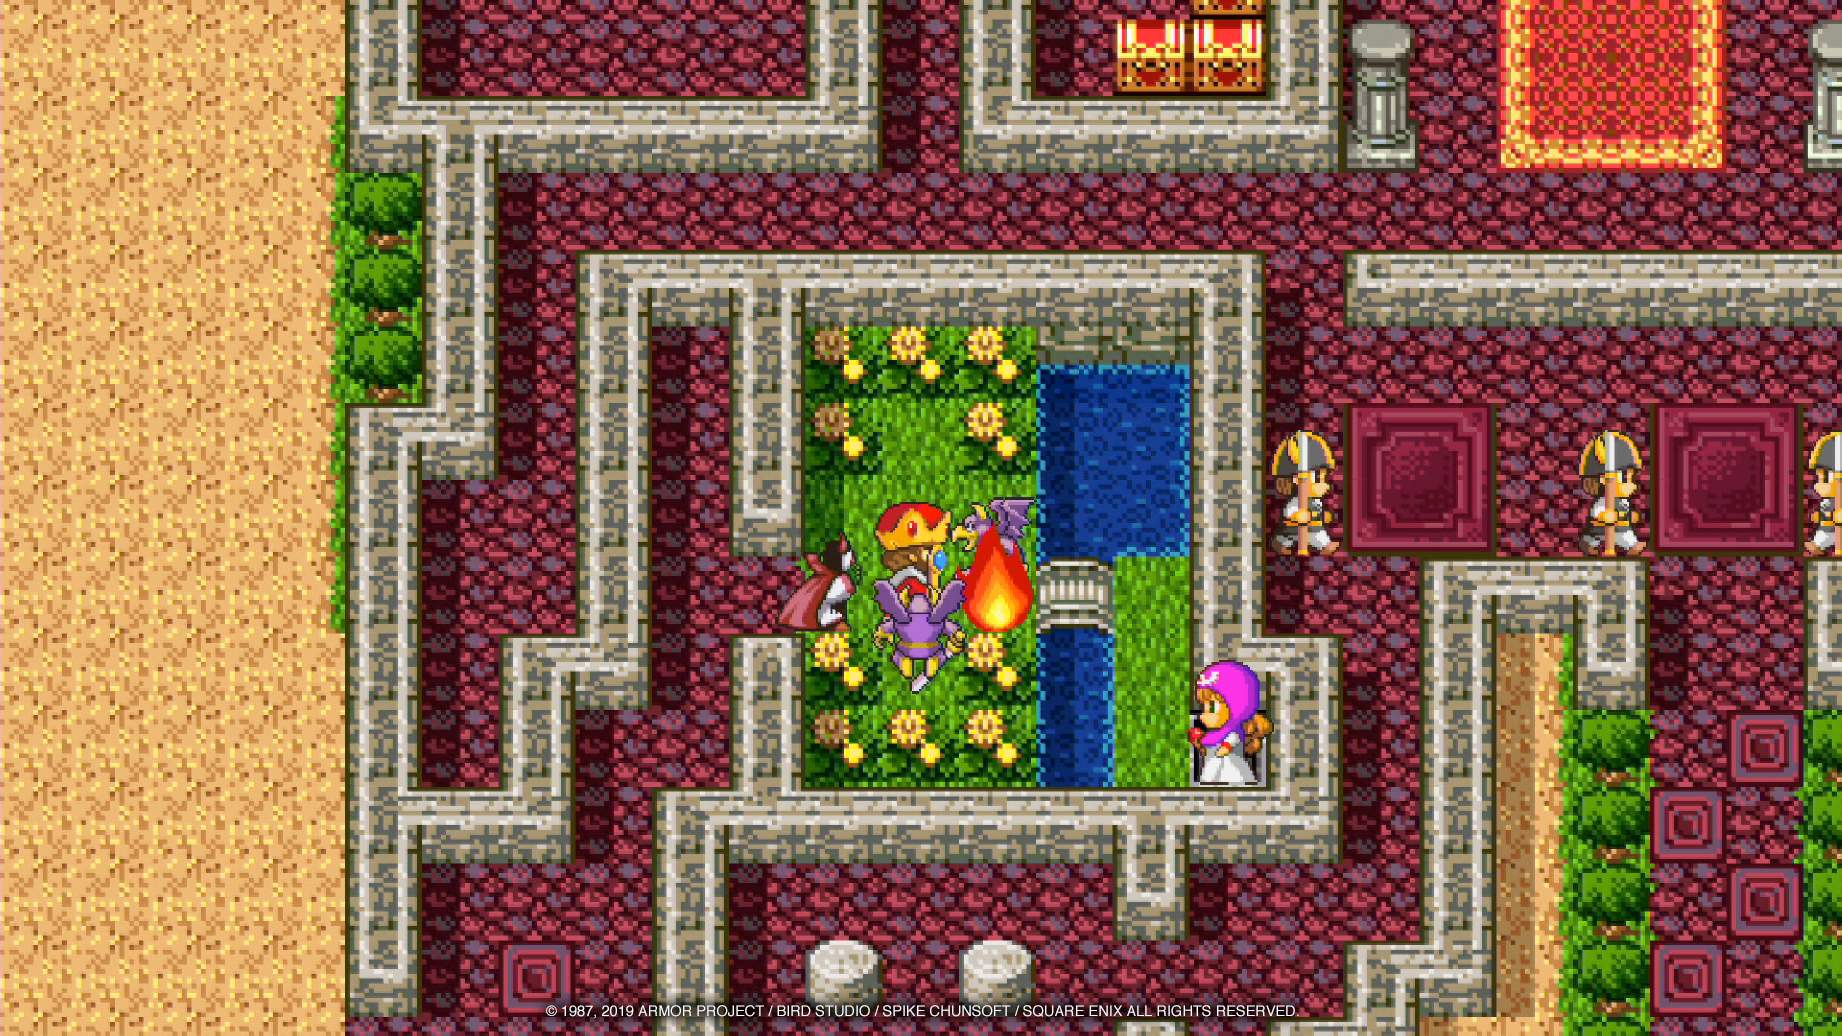 The king is attacked by monsters in the castle.